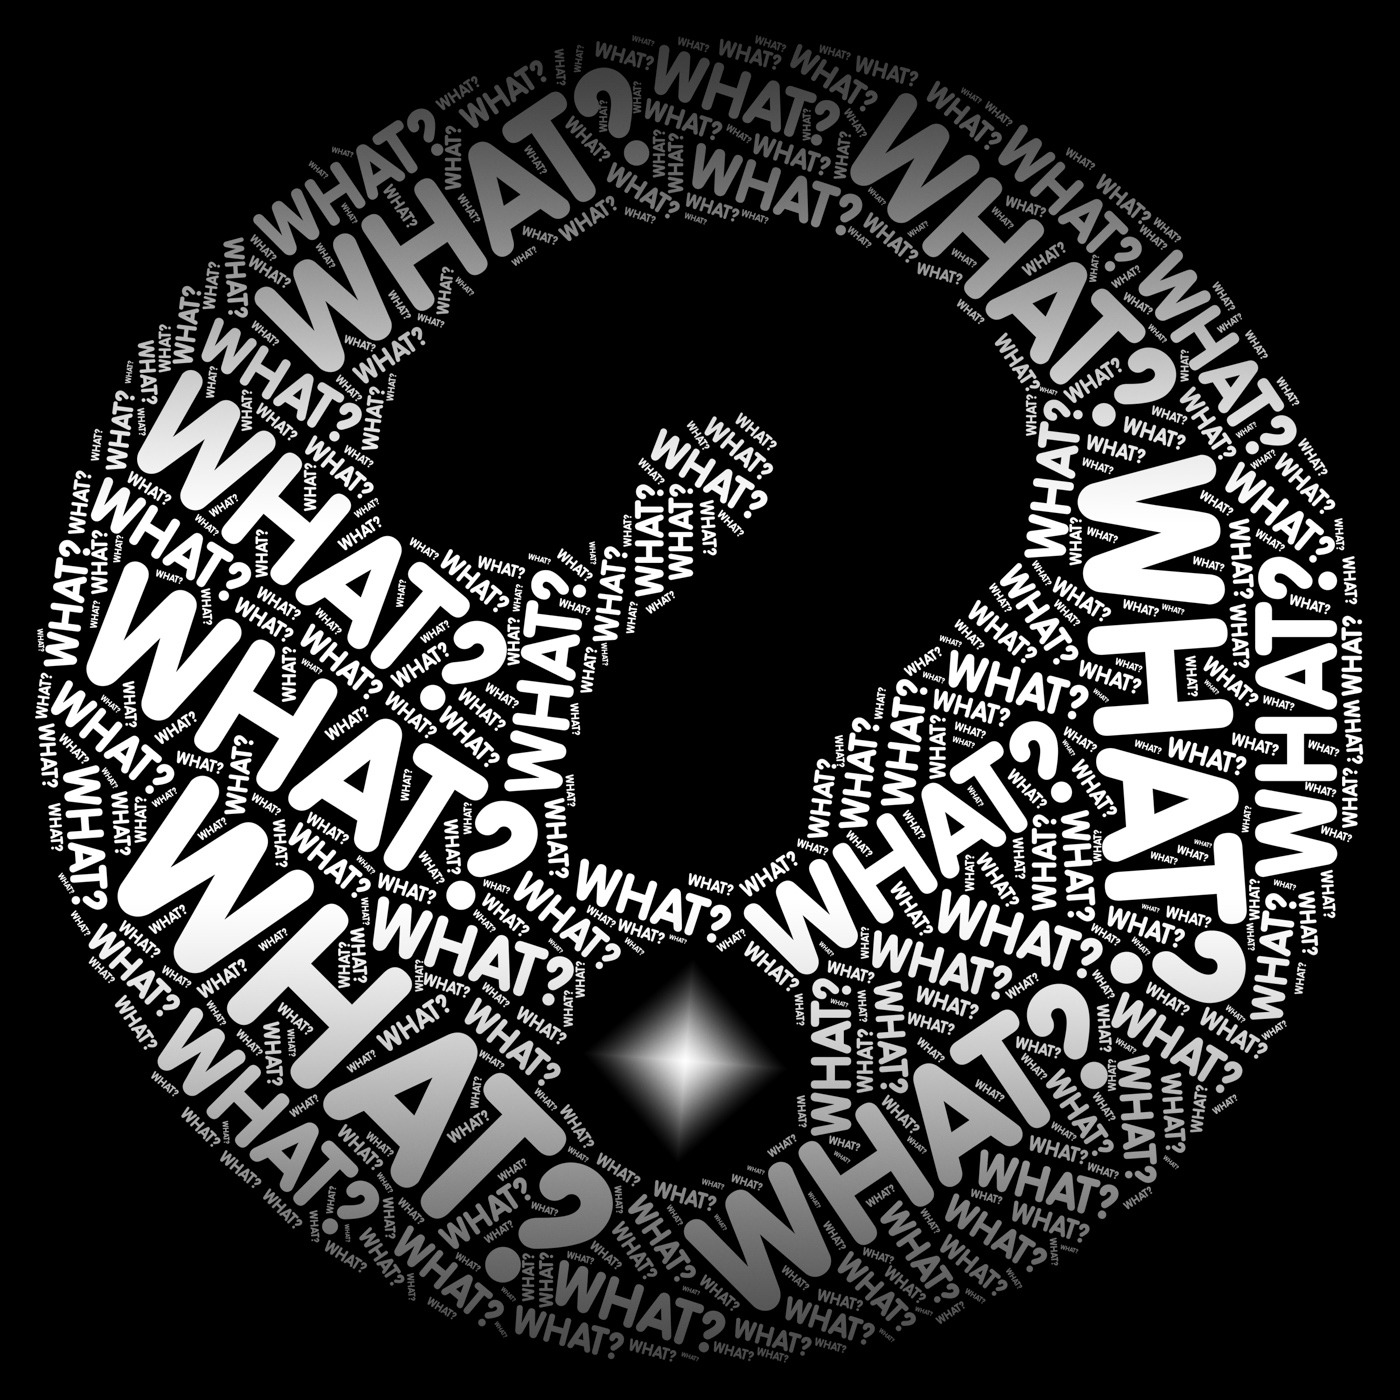 What question mark represents frequently asked questions photo